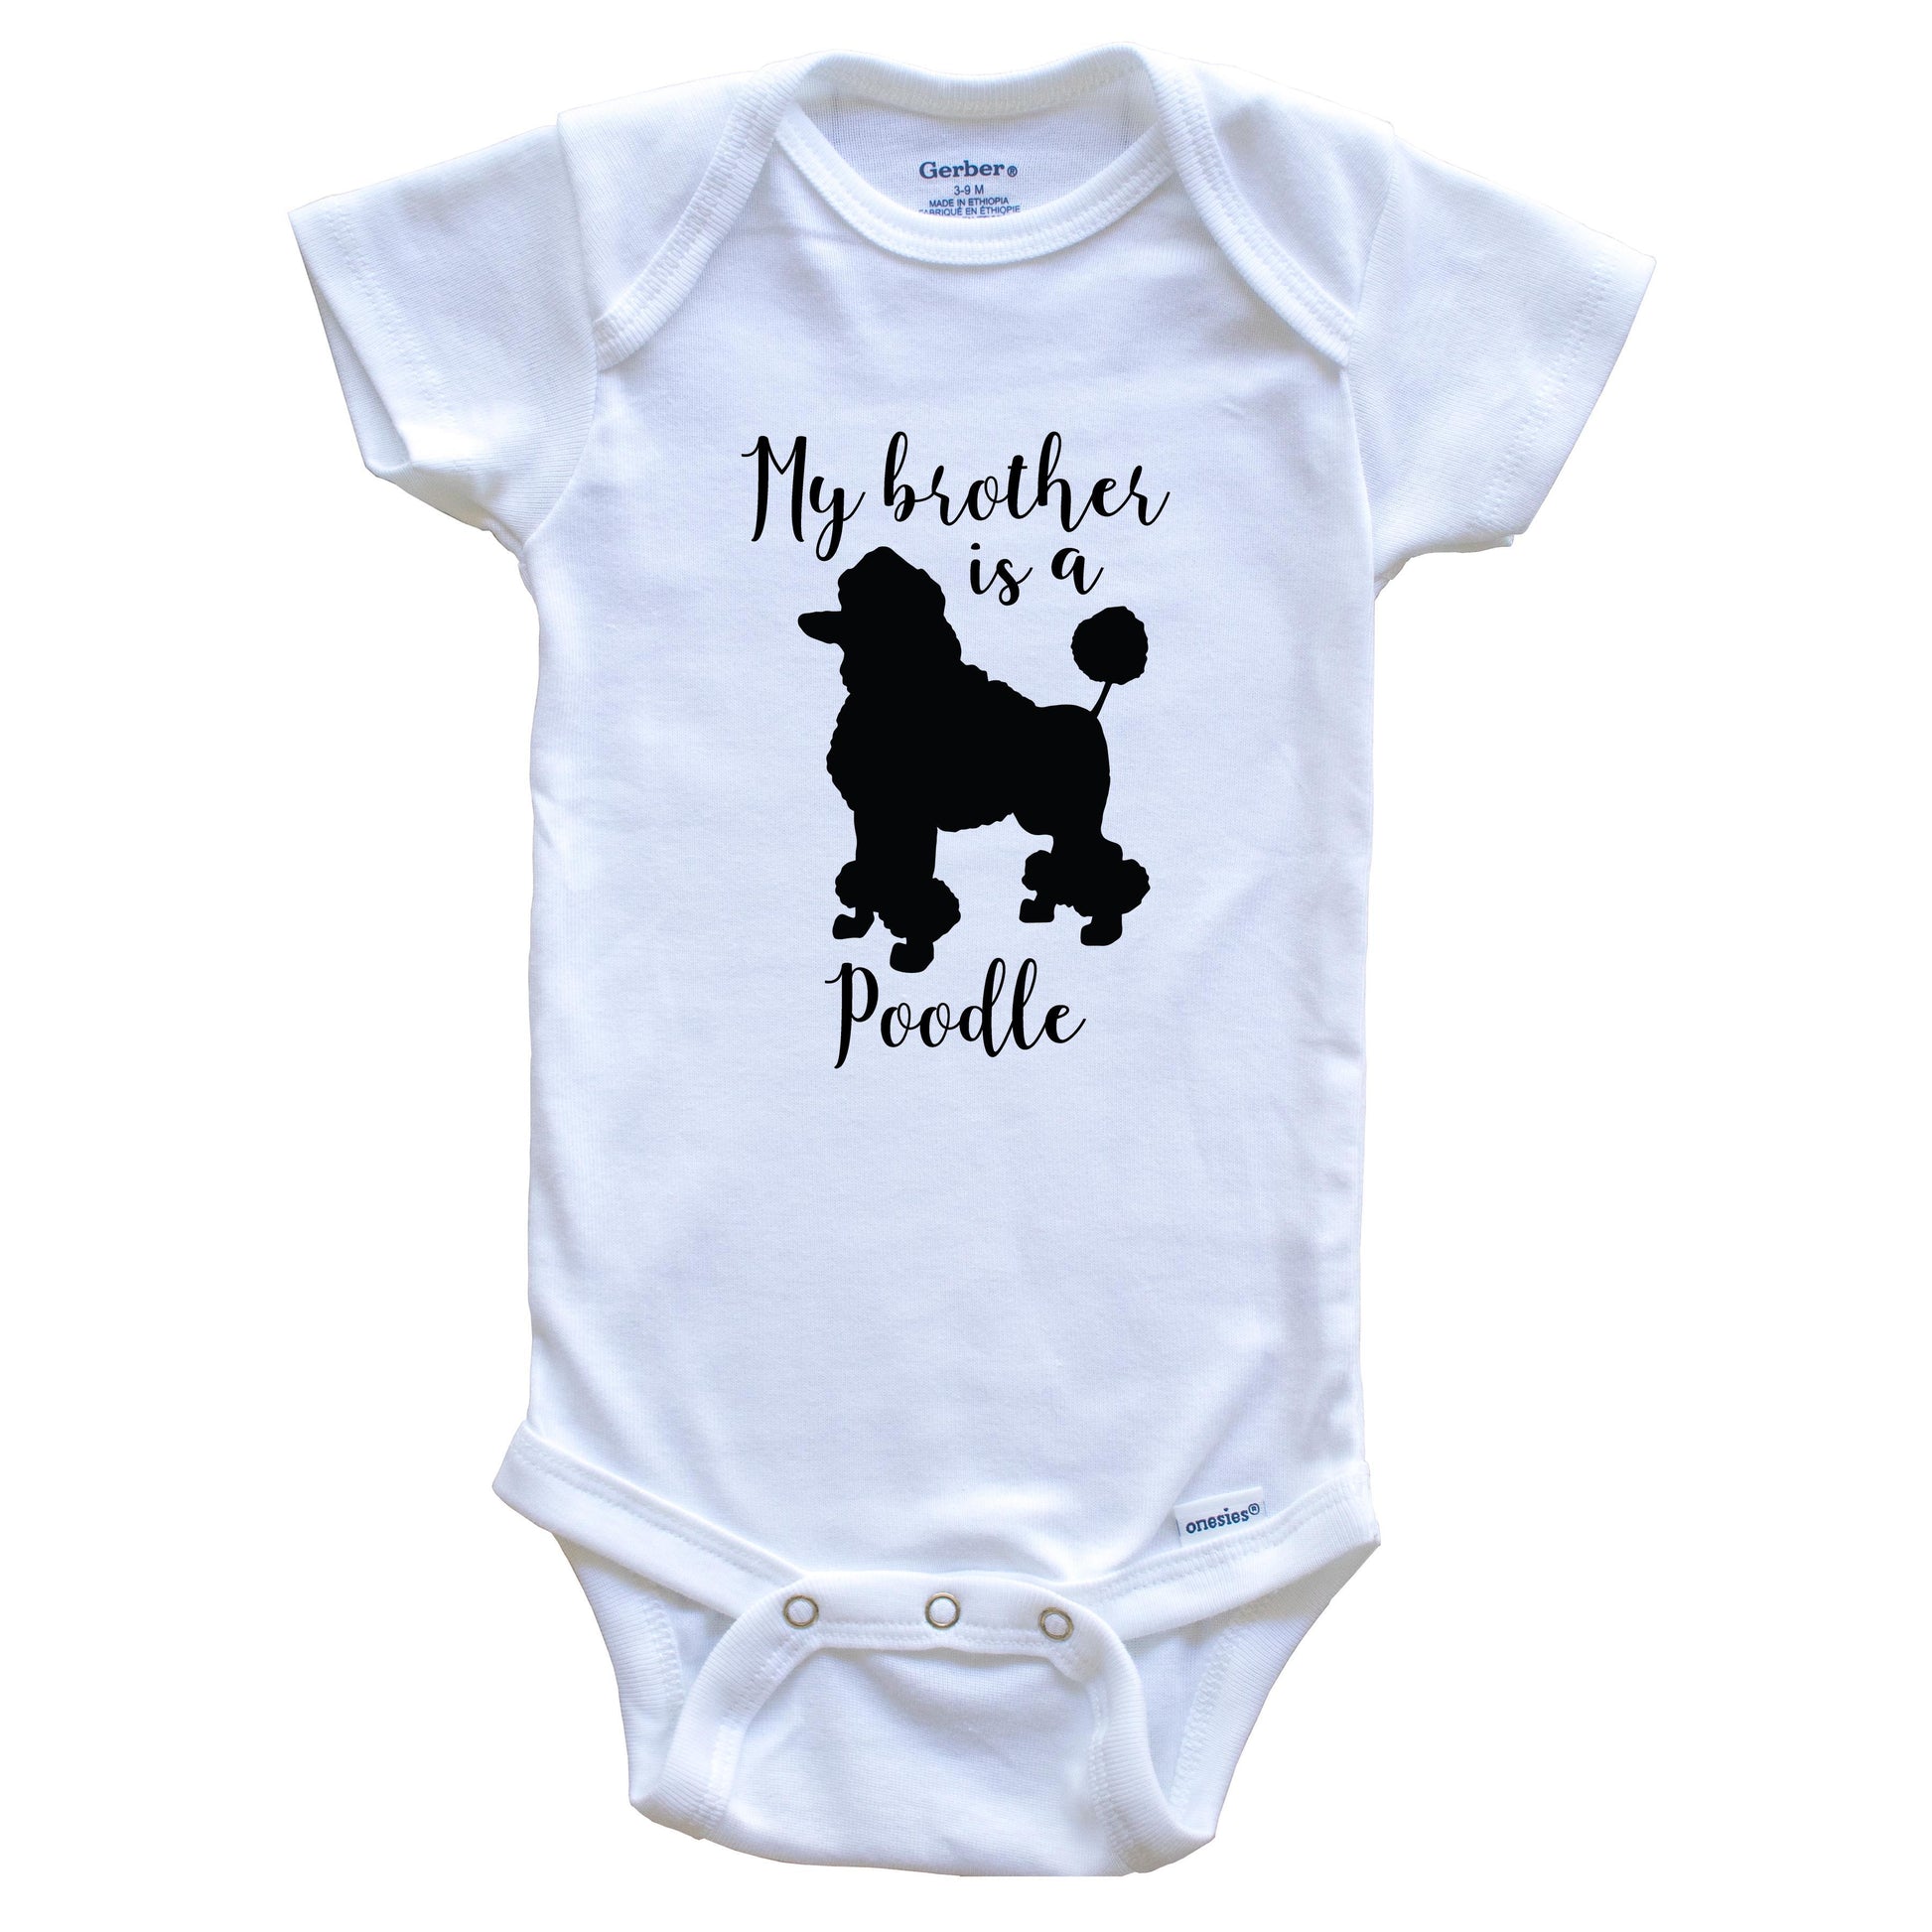 My Brother Is A Poodle Cute Dog Baby Onesie - Poodle One Piece Baby Bodysuit